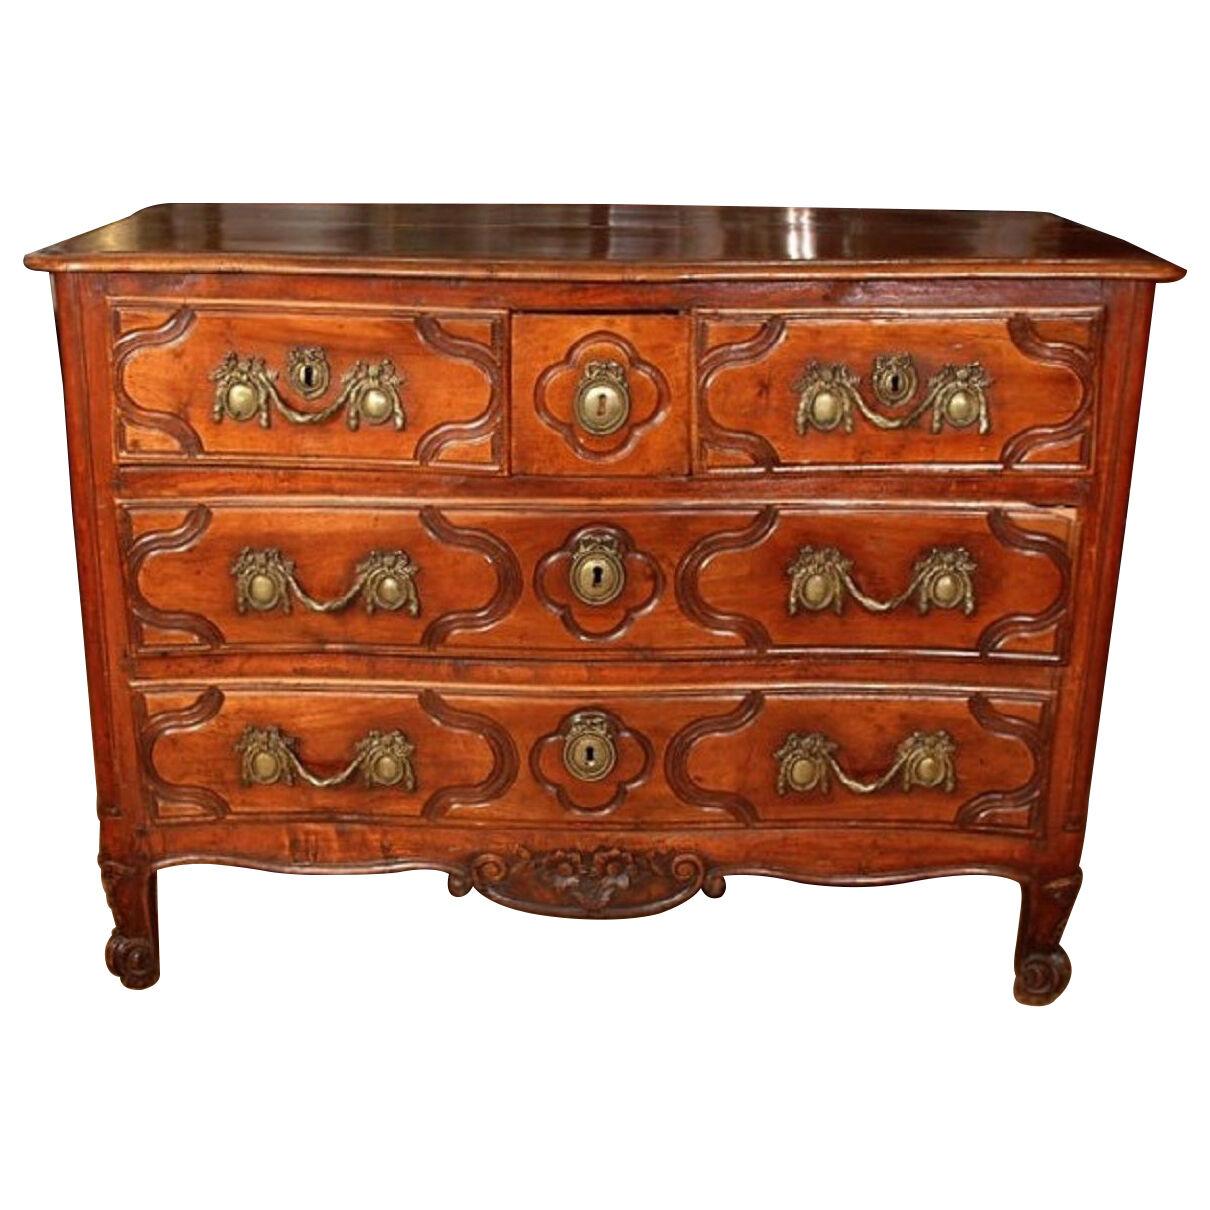 A Louis XV Commode by Hubert Roux